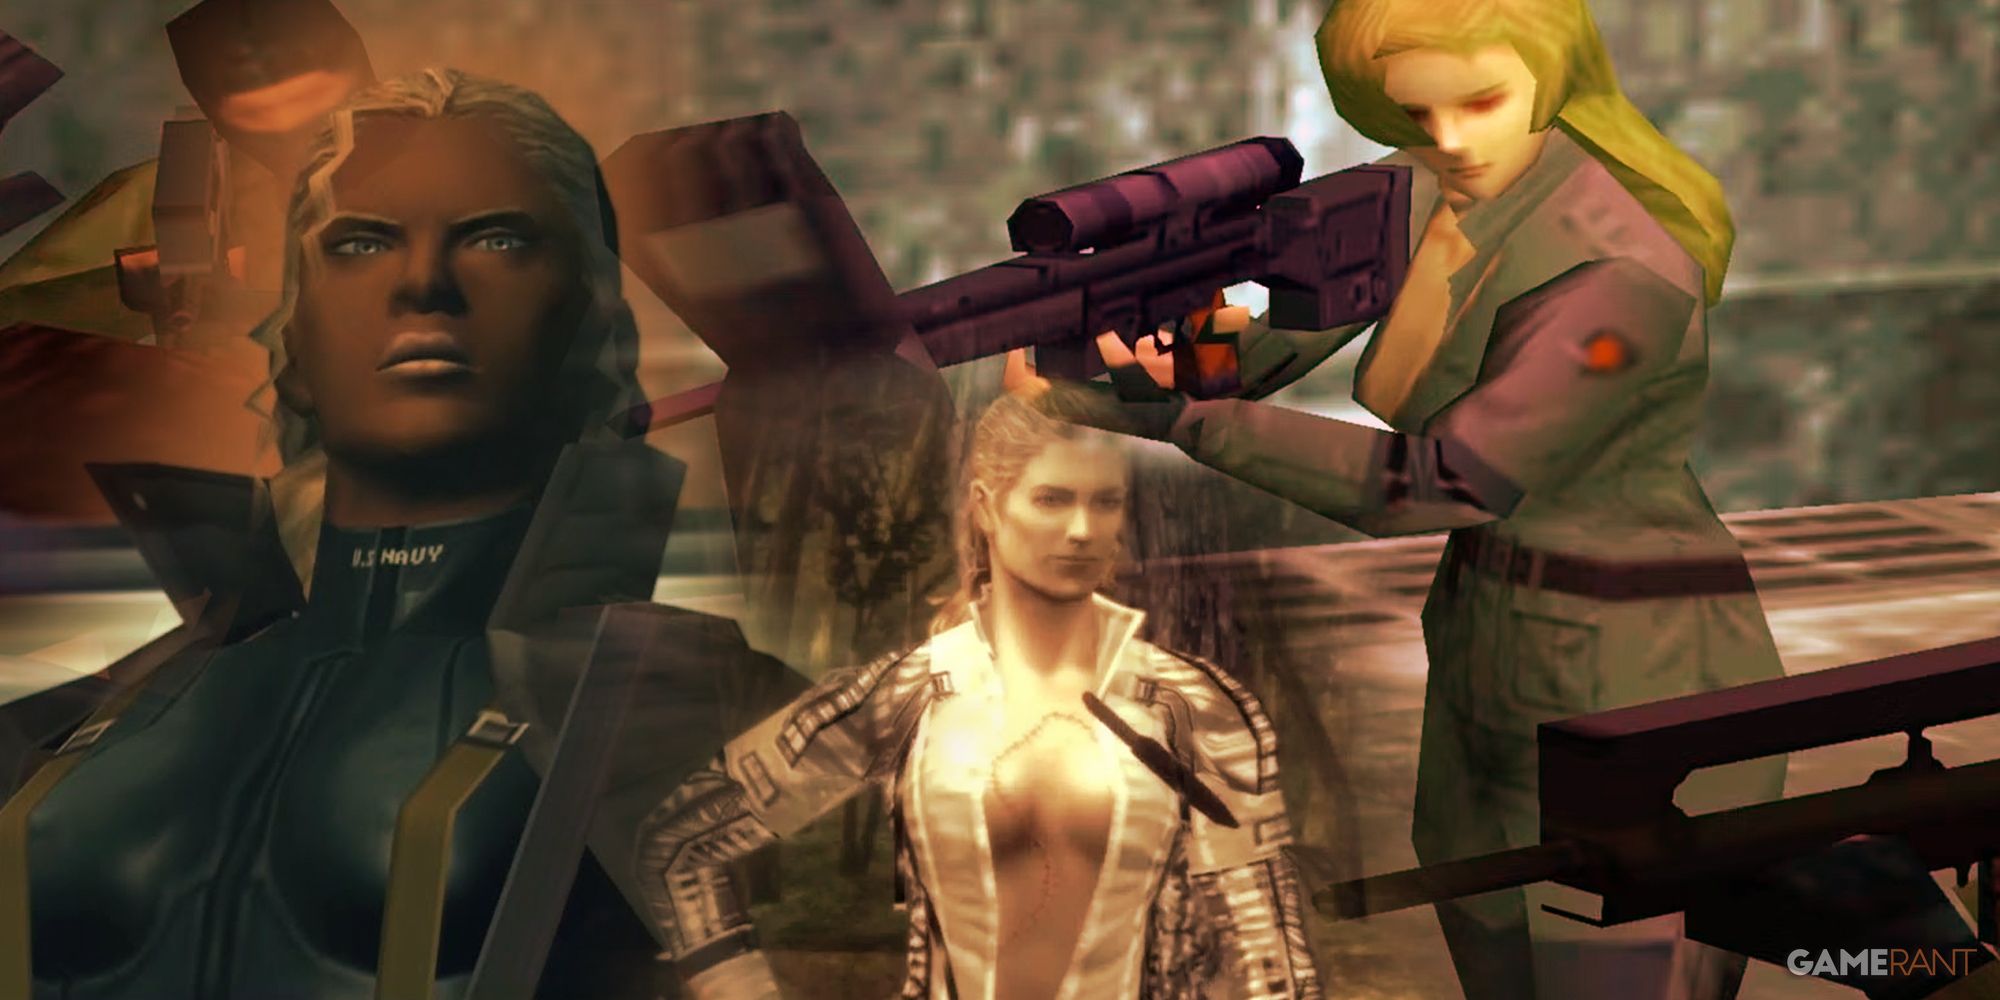 Metal Gear Solid 2: Sons of the Patriots Helena Dolph Jackson / Fortune, Metal Gear Solid 3: Snake Eater The Boss, Metal Gear Solid Sniper Wolf